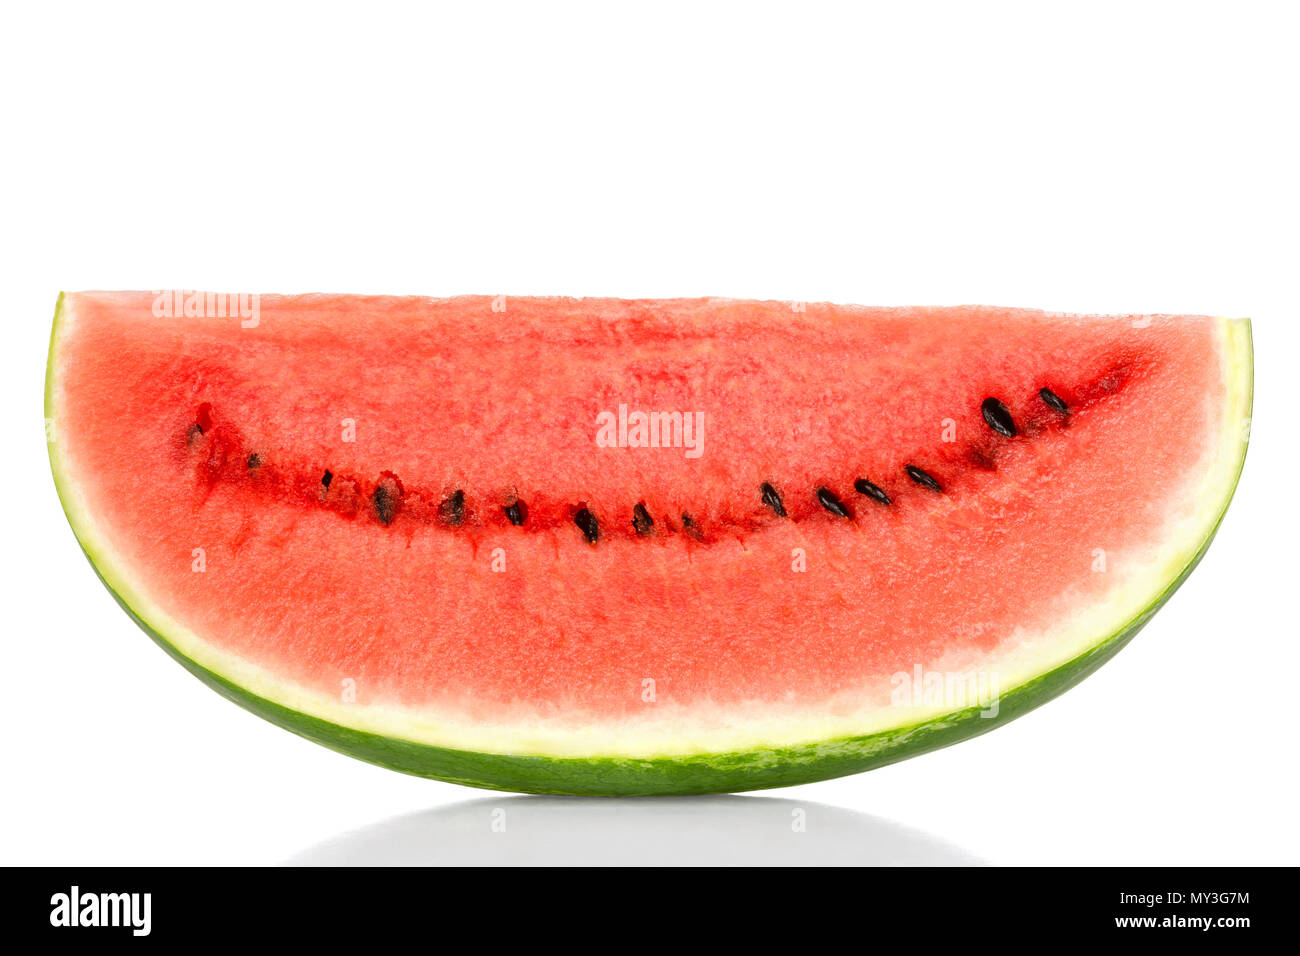 Sweet watermelon slice, front view, over white. Large ripe fruit of Citrullus lanatus with green striped skin, red pulp and black seeds. Edible. Stock Photo